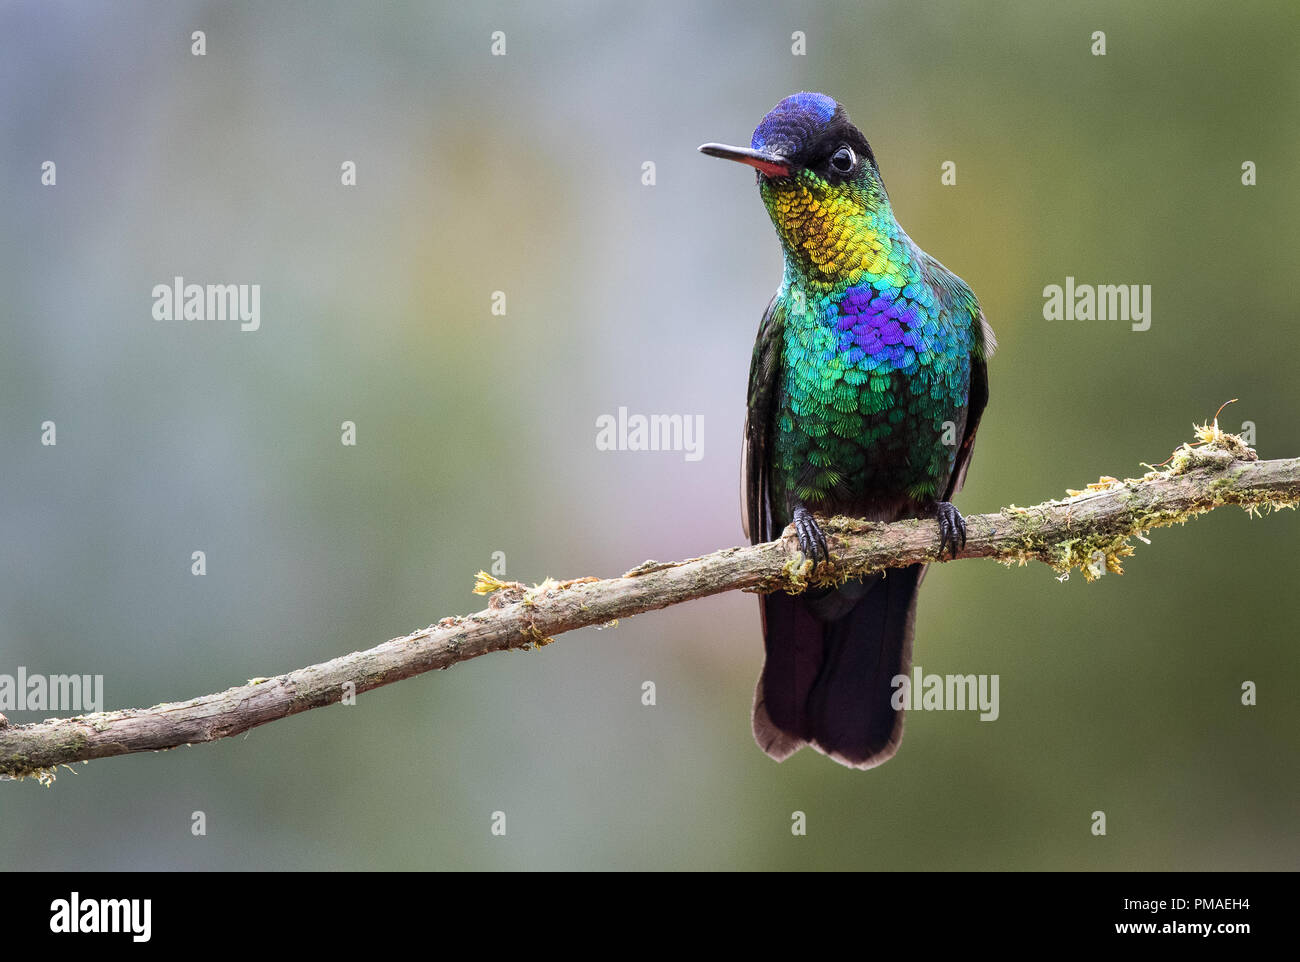 A fiery throated hummingbird photographed in Costa Rica Stock Photo